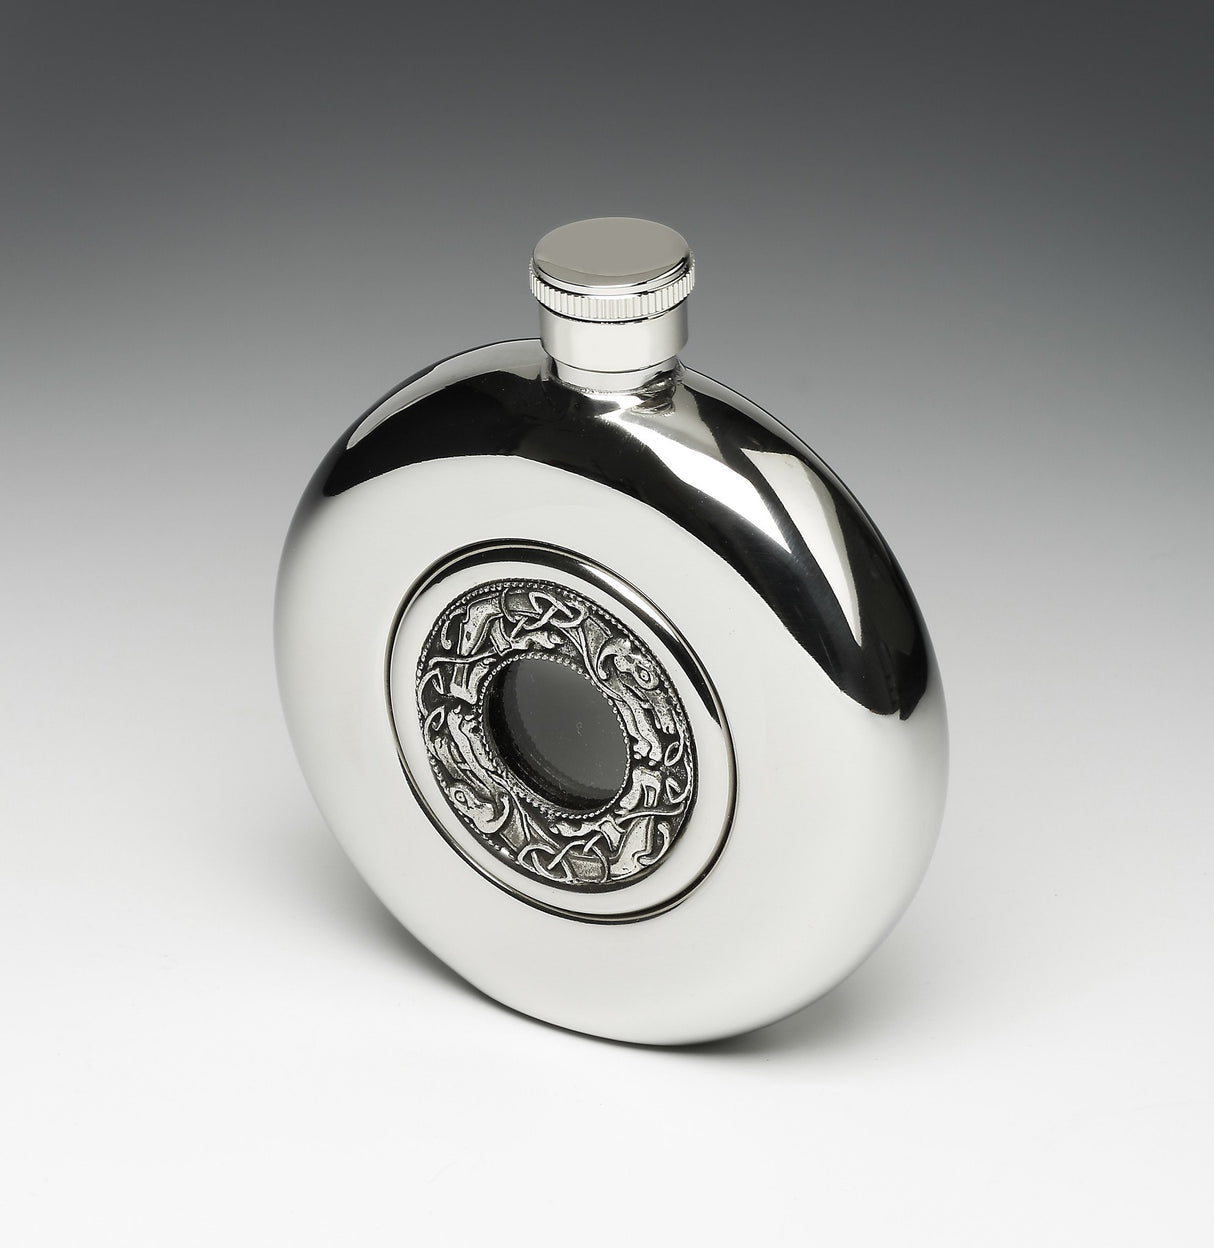 Round Whiskey Hip Flask with Glass Center and Celtic Dogs/Hounds Design